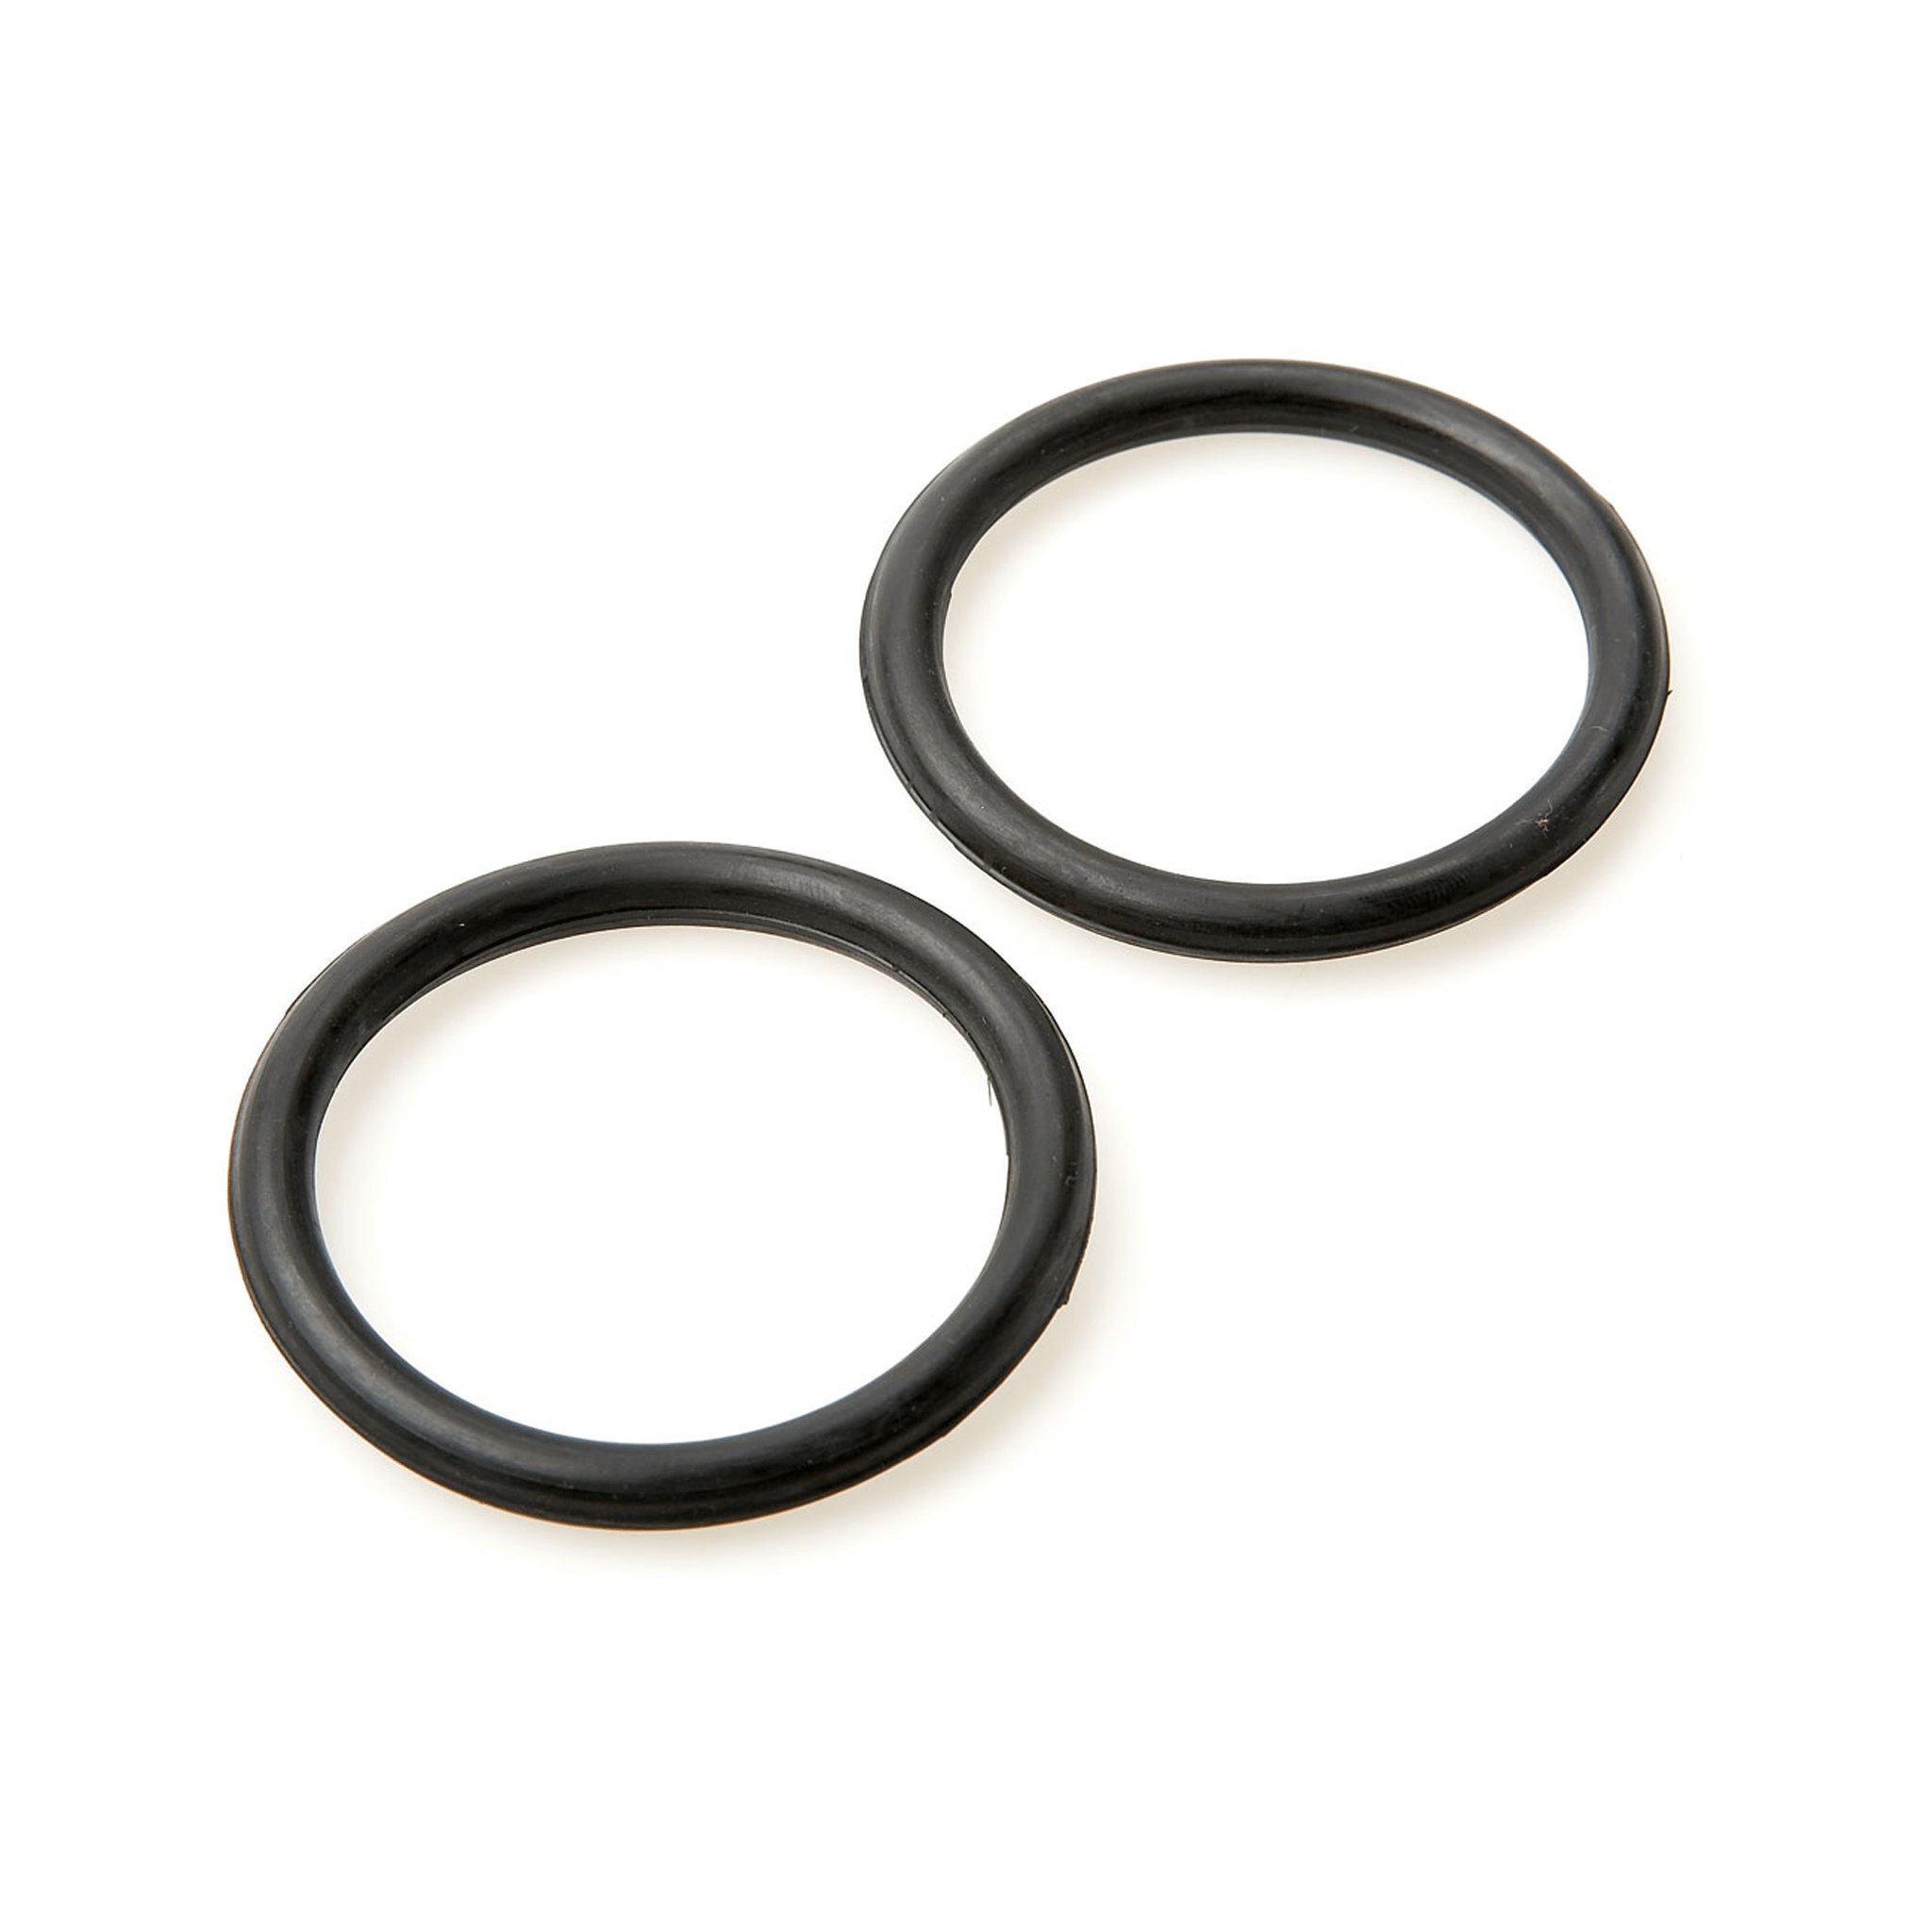 Lorina Rubber Rings for Safety Irons in Black 0964